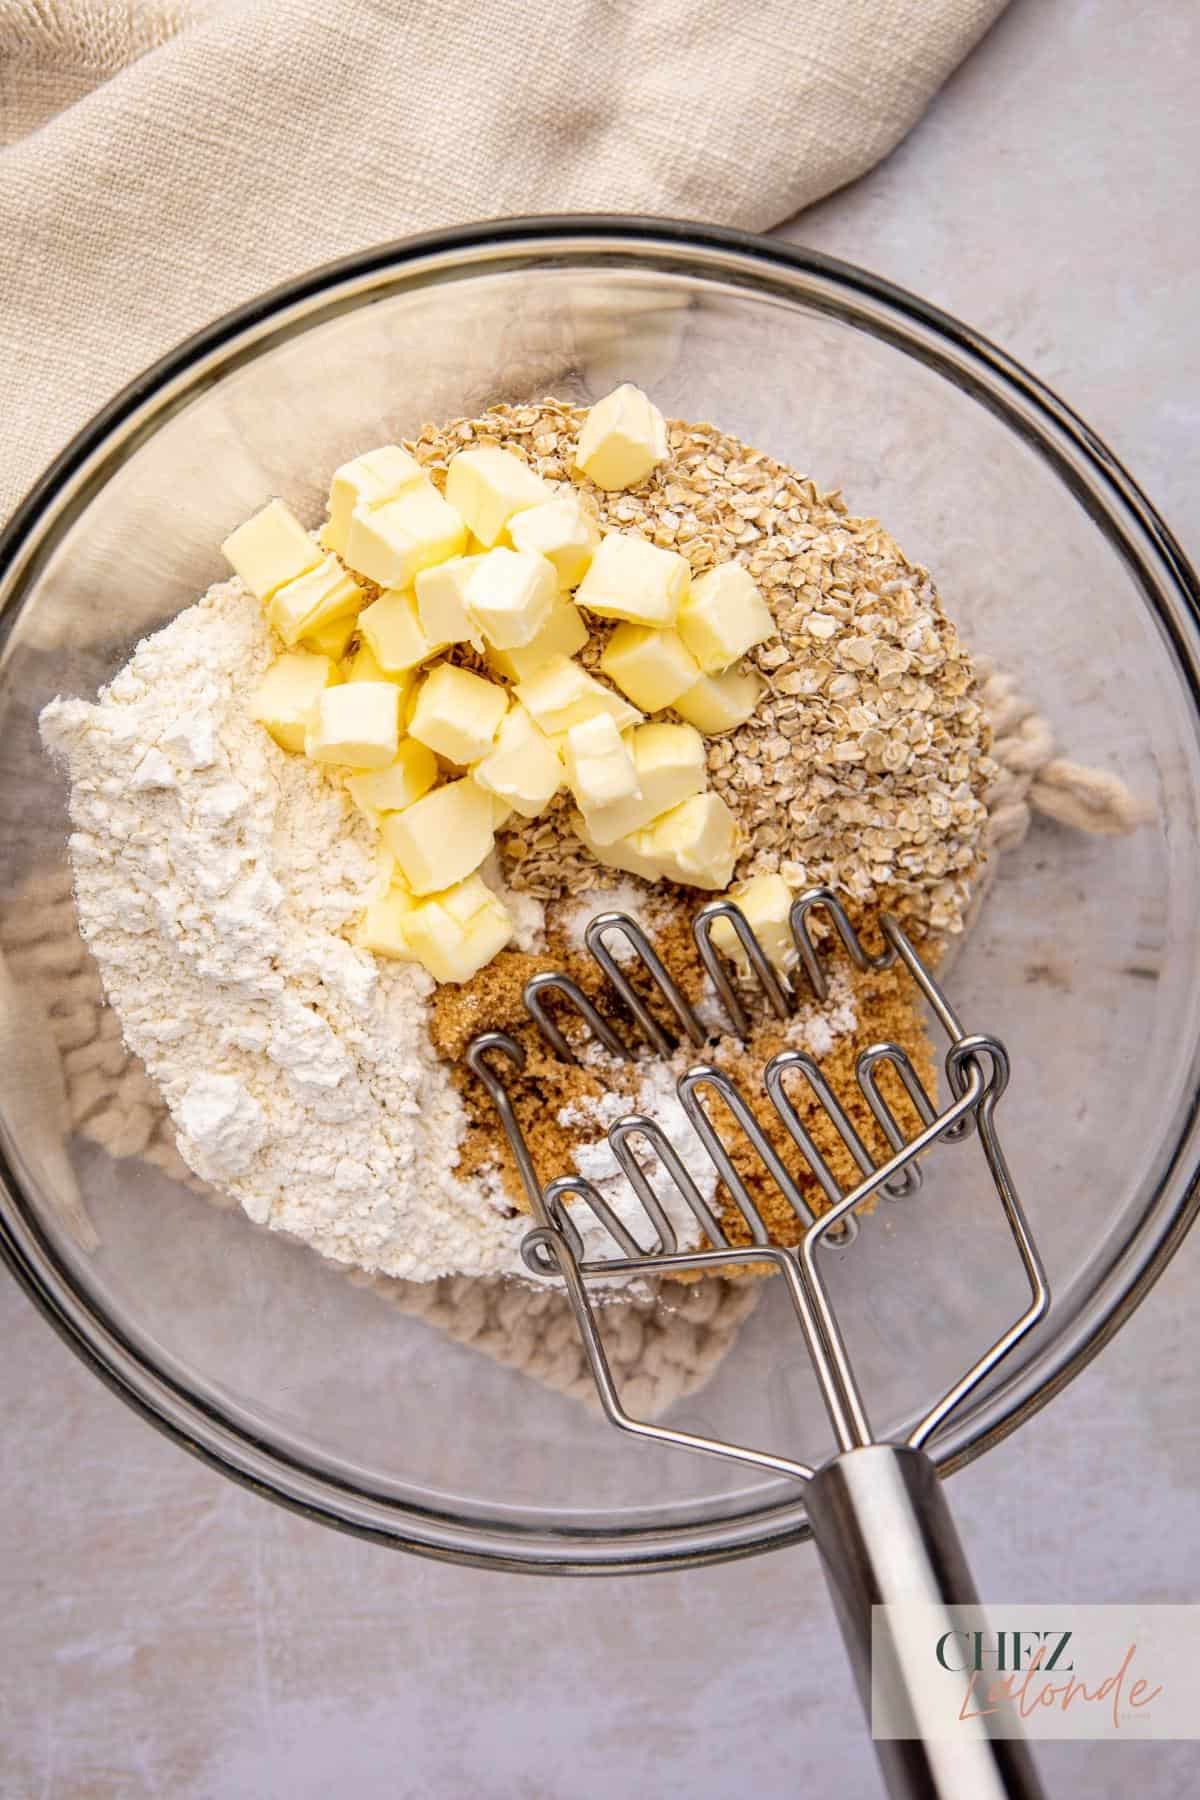 A glass bowl filled with oatmeal, butter, and other ingredients.